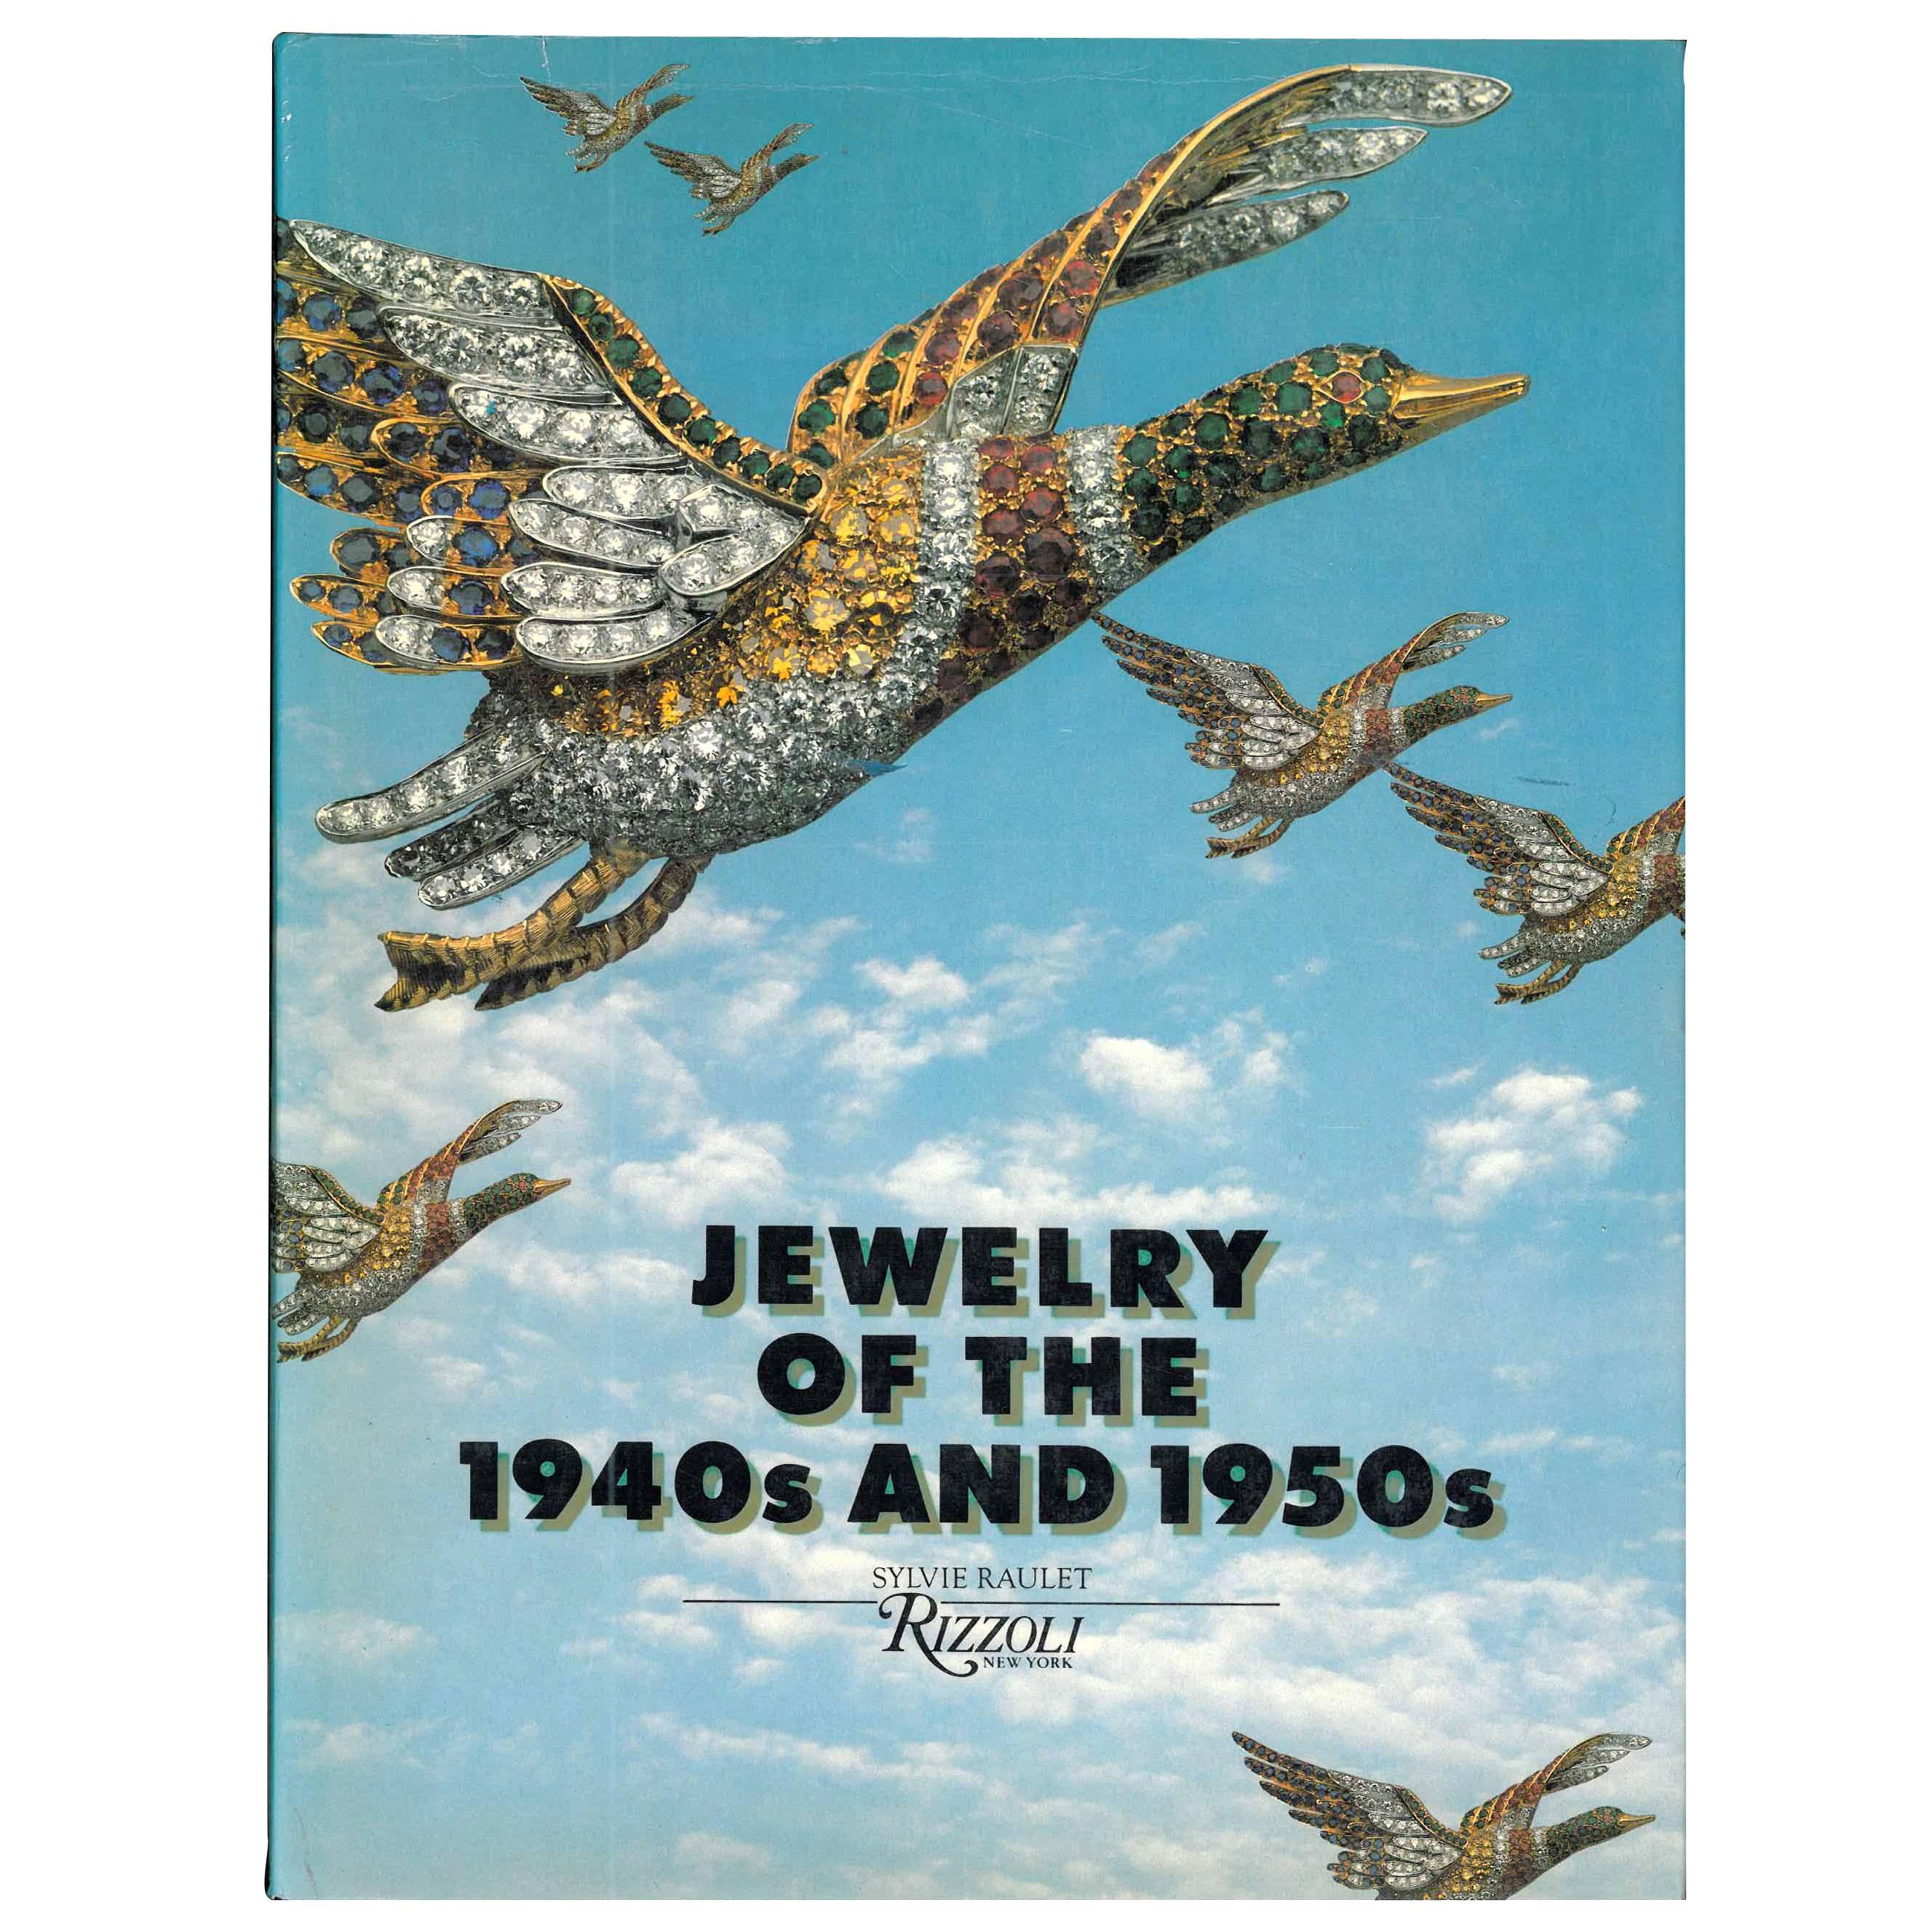  Jewelry of the 1940s and 1950s (Book)